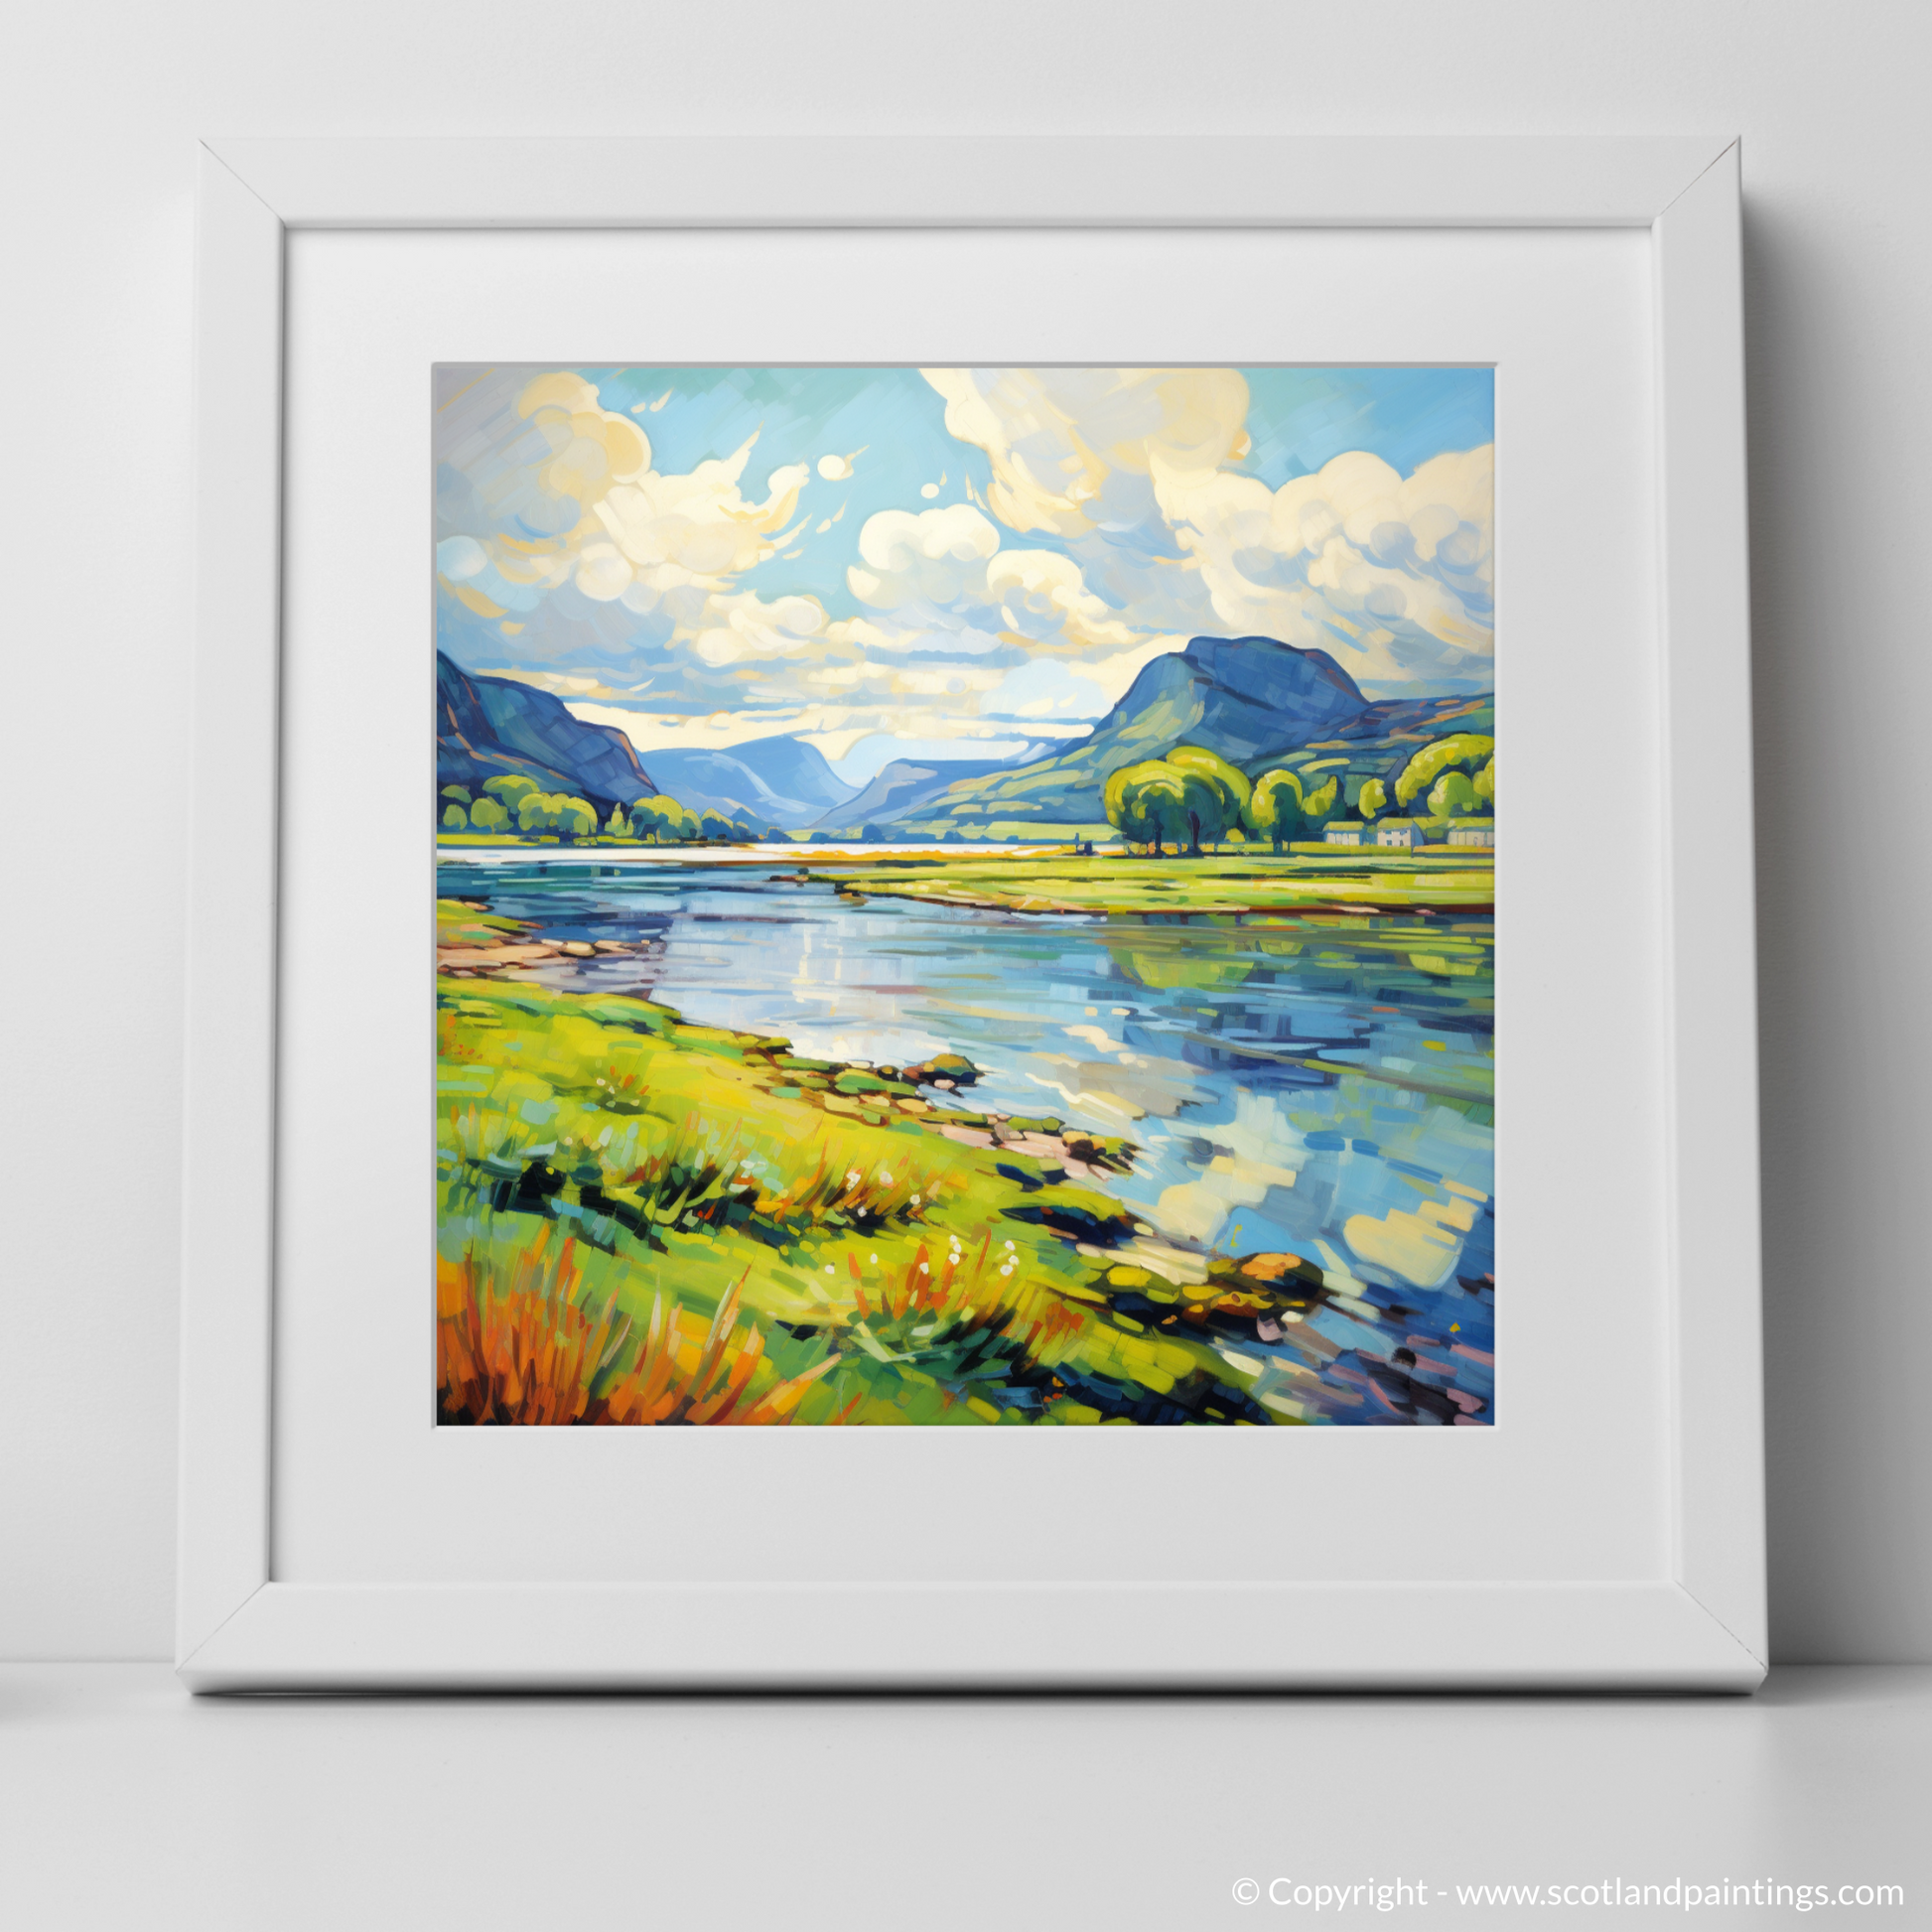 Art Print of Loch Leven, Perth and Kinross in summer with a white frame